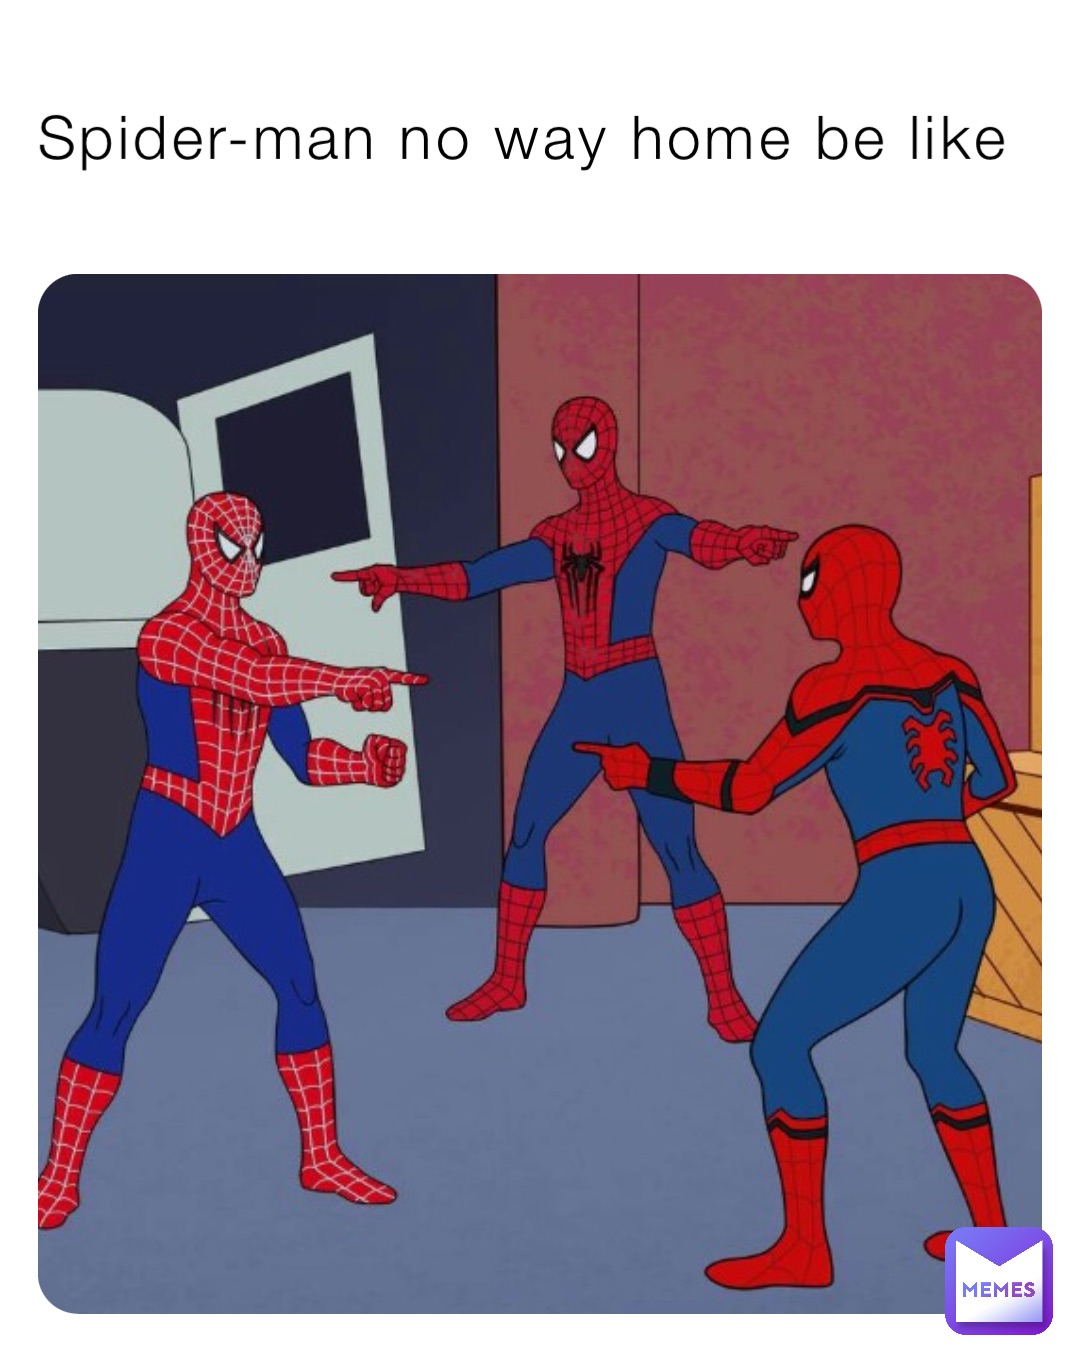 Spider-man no way home be like